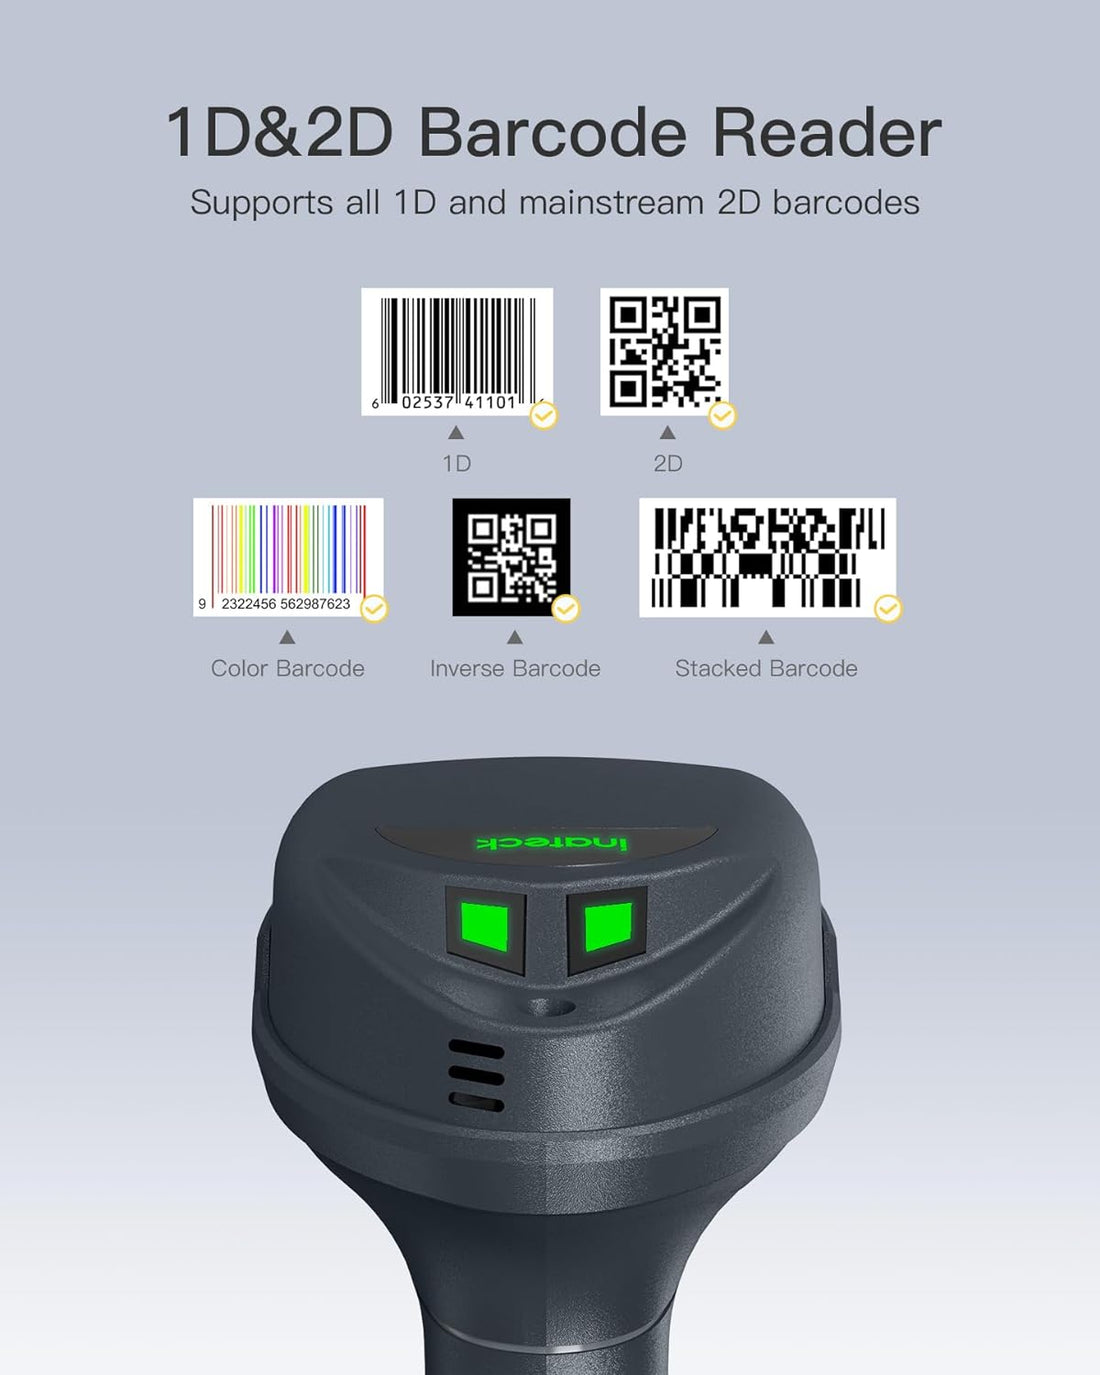 Inateck Wireless Barcode Scanner 2D, QR Code Scanner, Mega Pixel, 2600 mAh Battery, with Smart Base, Screen Scanning, BCST-91